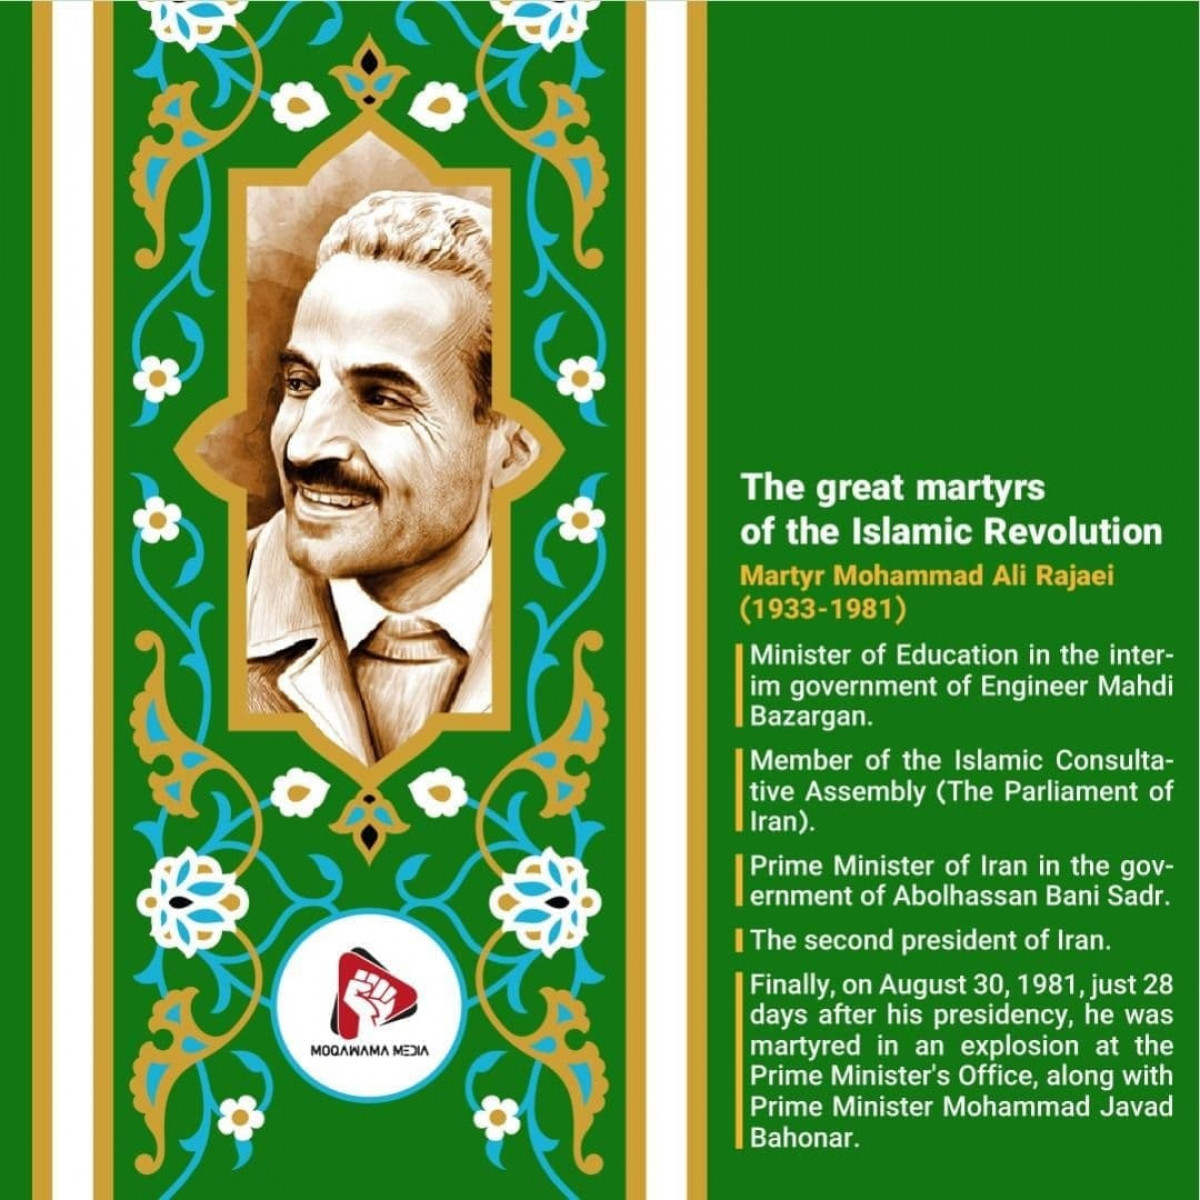 The great martyrs of the Islamic Revolution9